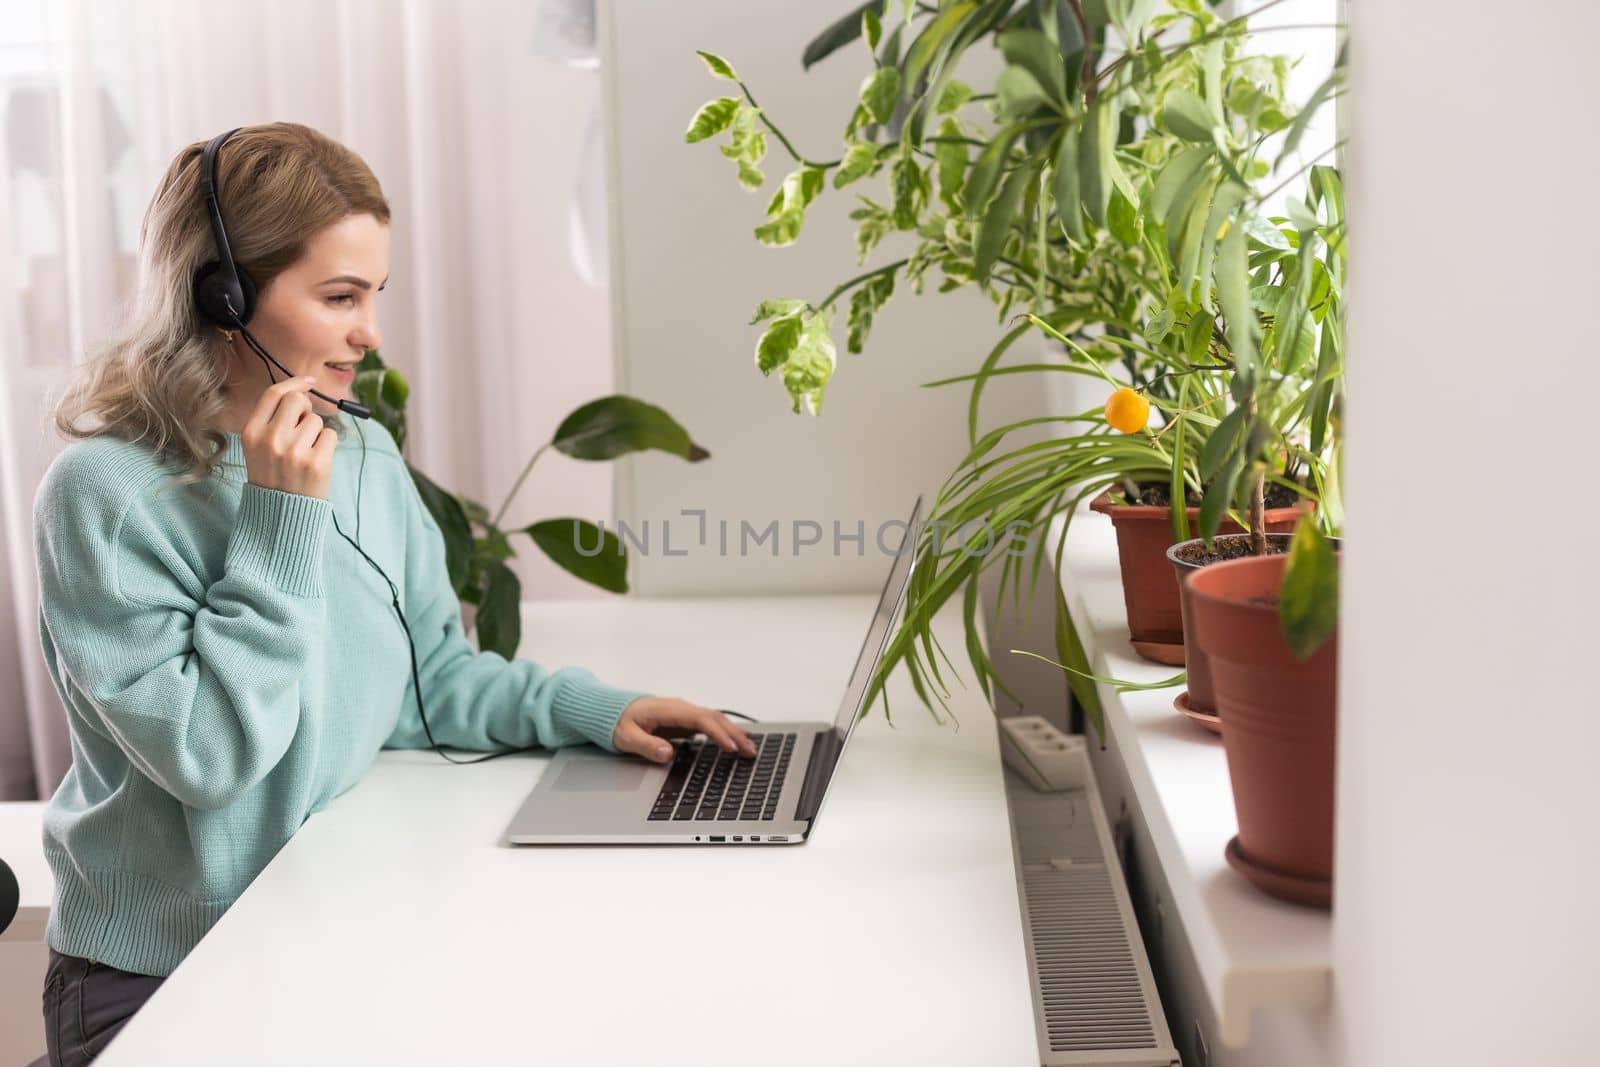 Positive young woman using a laptop at home, video conference. Cozy home interior with indoor plants. Remote work, business, freelance, online shopping, e-learning concept by Andelov13